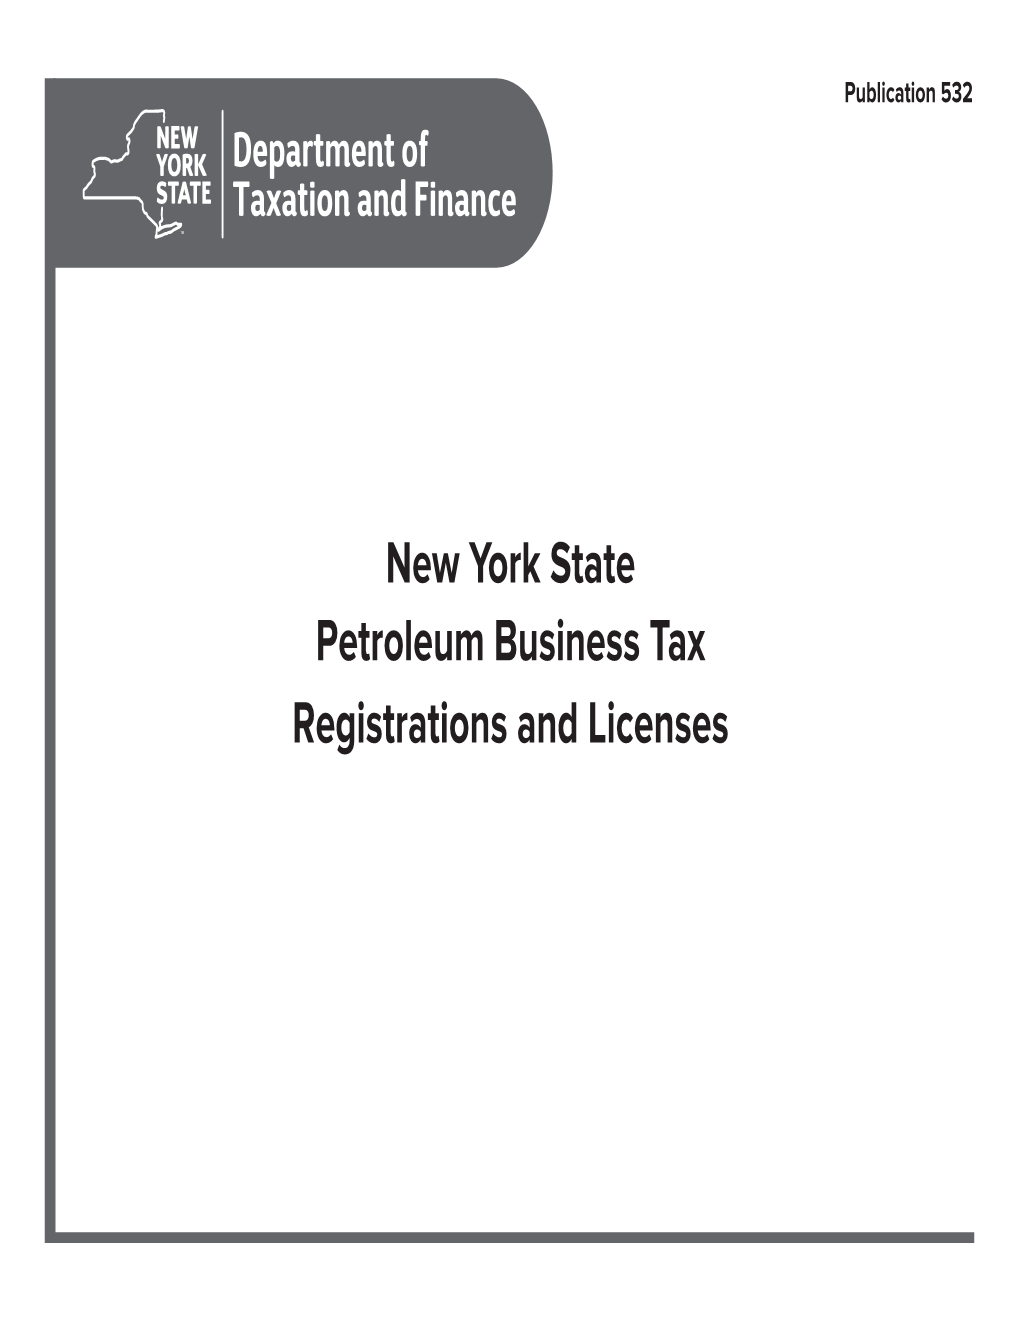 Publication 532:11/19:New York State Petroleum Business Tax